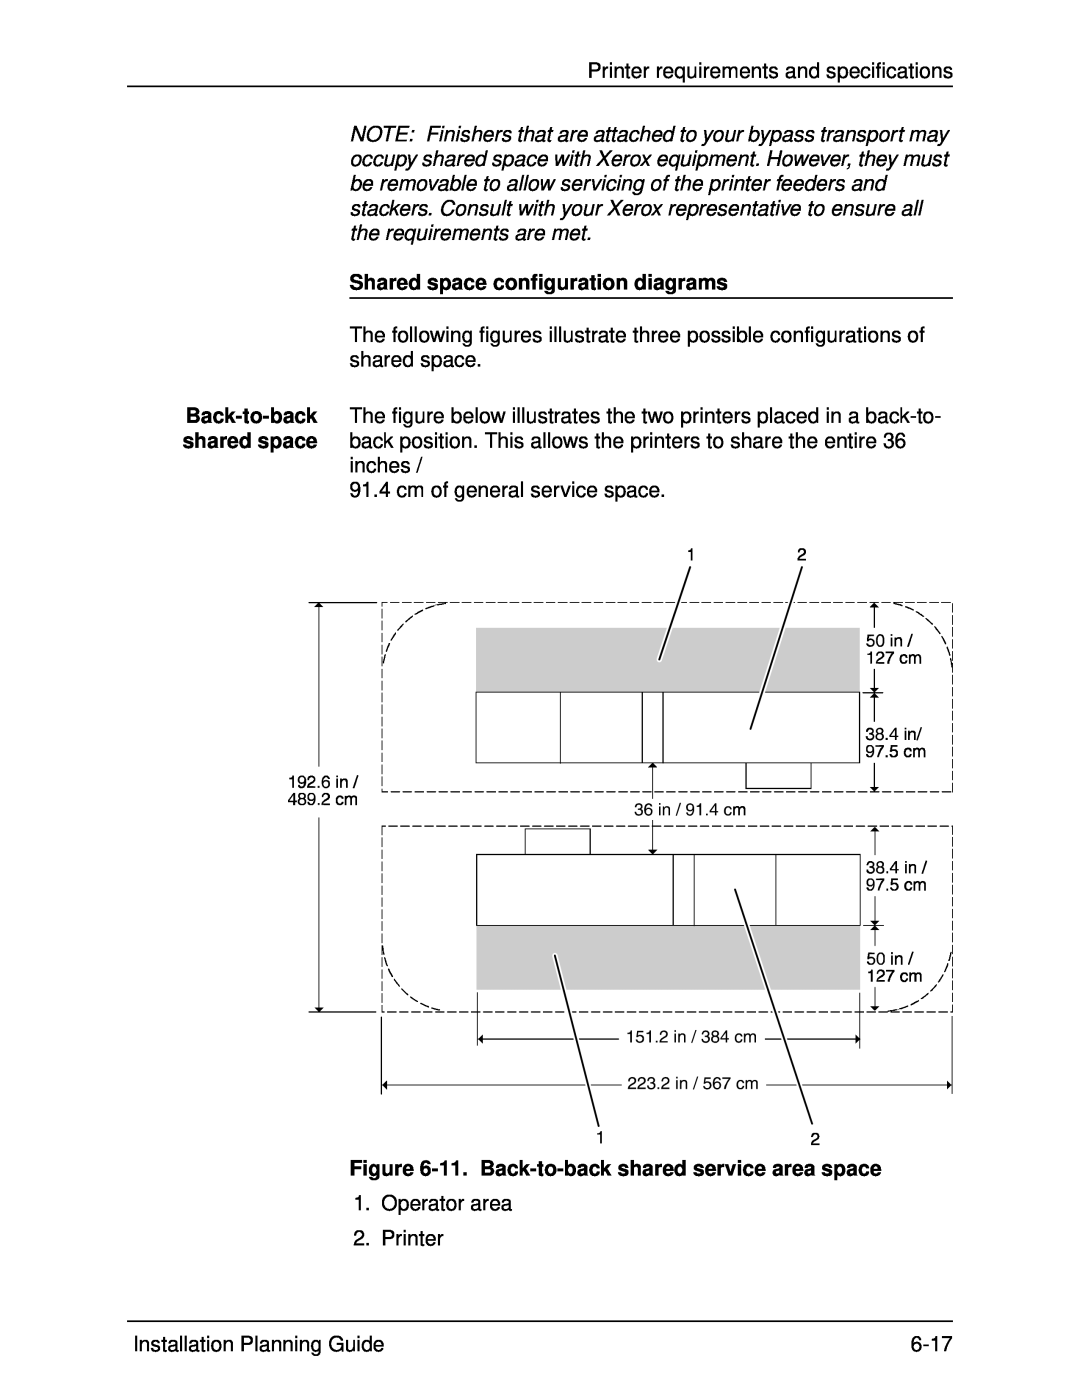 Xerox 155, 100, 135, 115 manual Shared space configuration diagrams, 11. Back-to-back shared service area space 